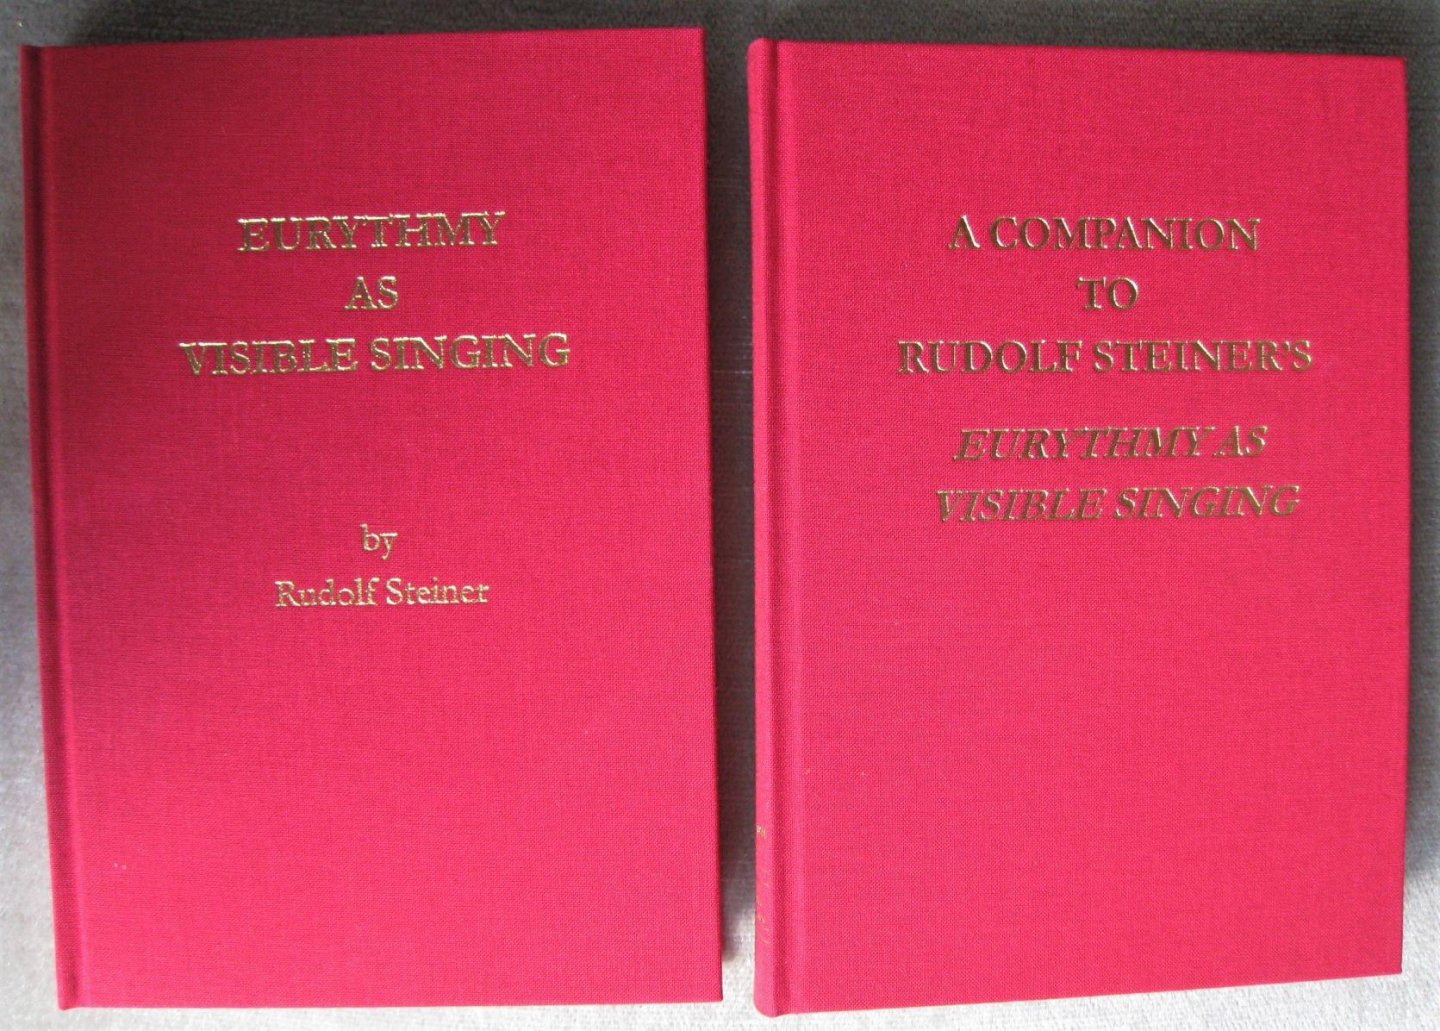 Steiner, Rudolf  -  Stott, Alan - Eurythmy as visible singing and a companion to Rudolf Steiner's Eurythmy as visible singing